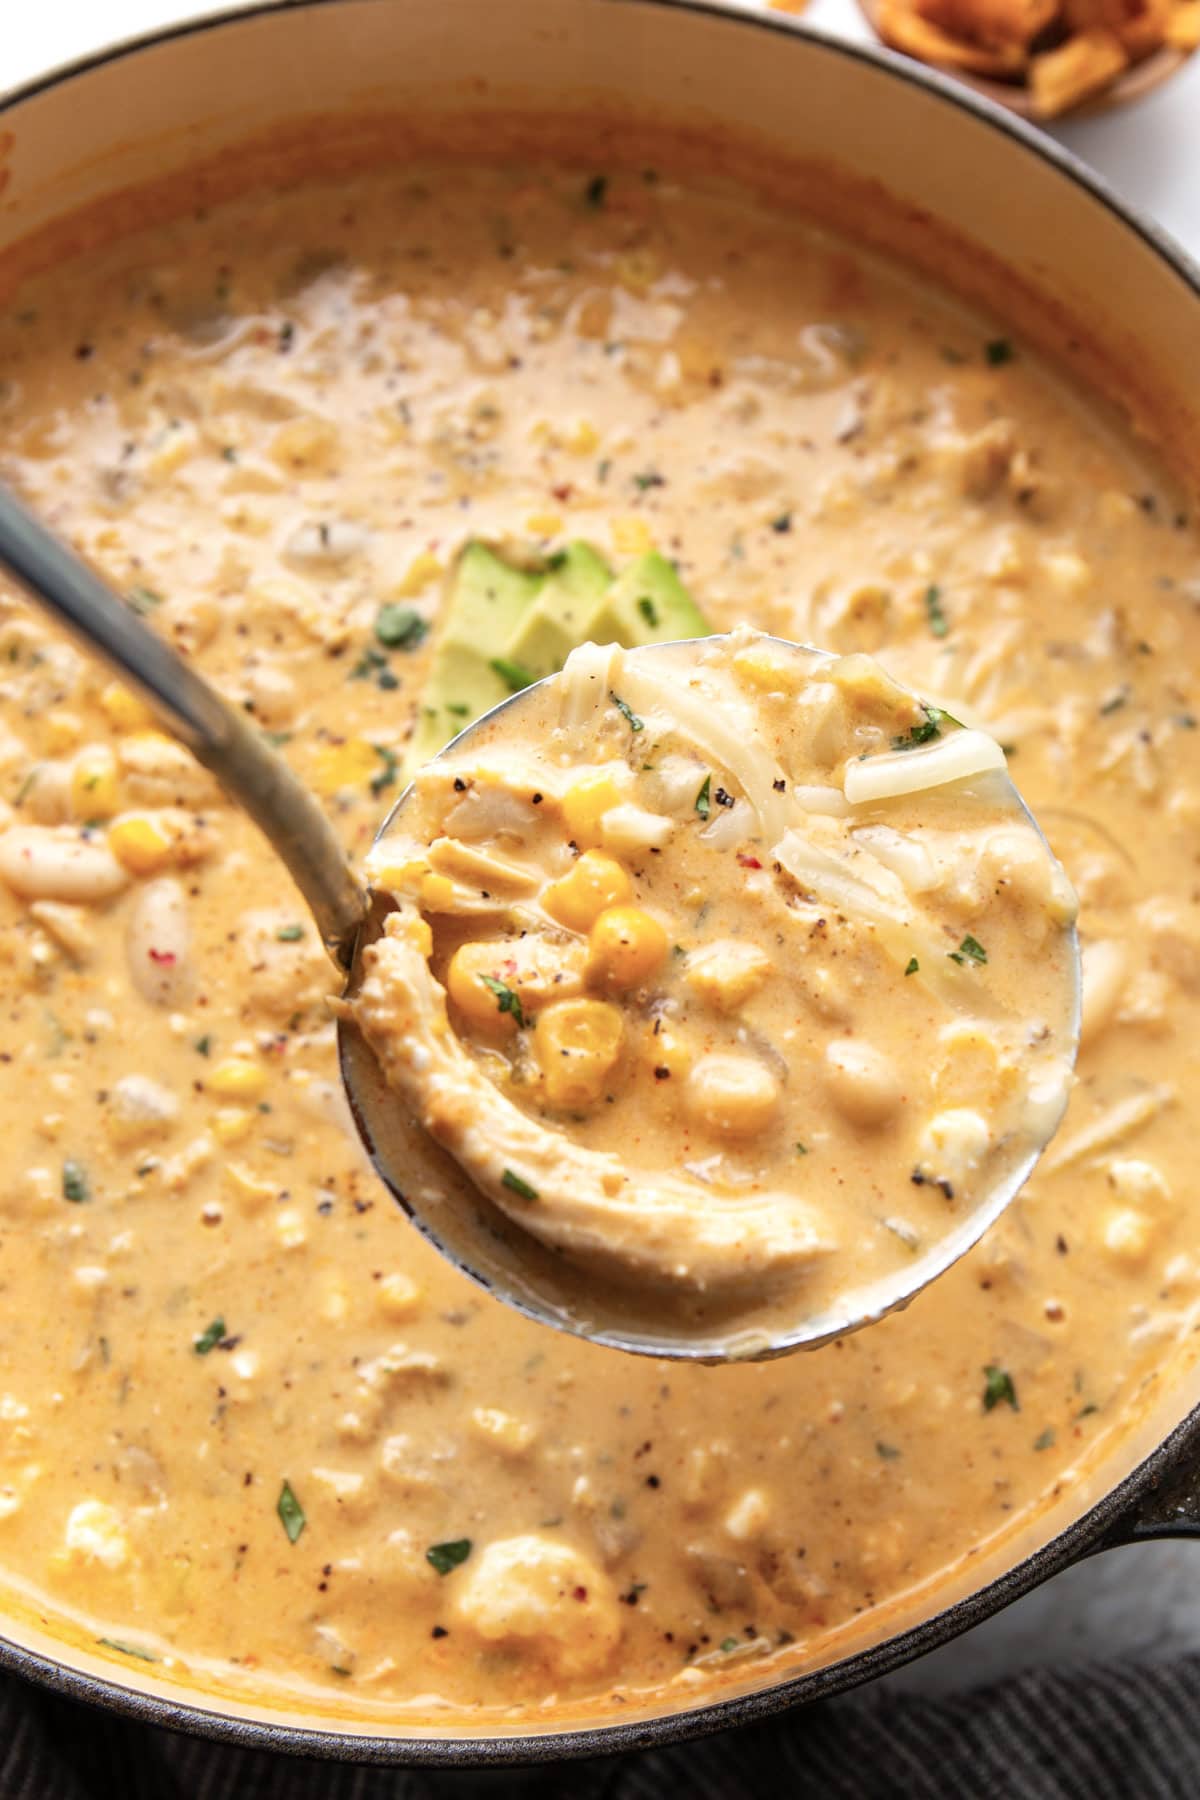 A generous ladle of white chicken chili with shredded chicken, beans, corn and chopped cilantro.